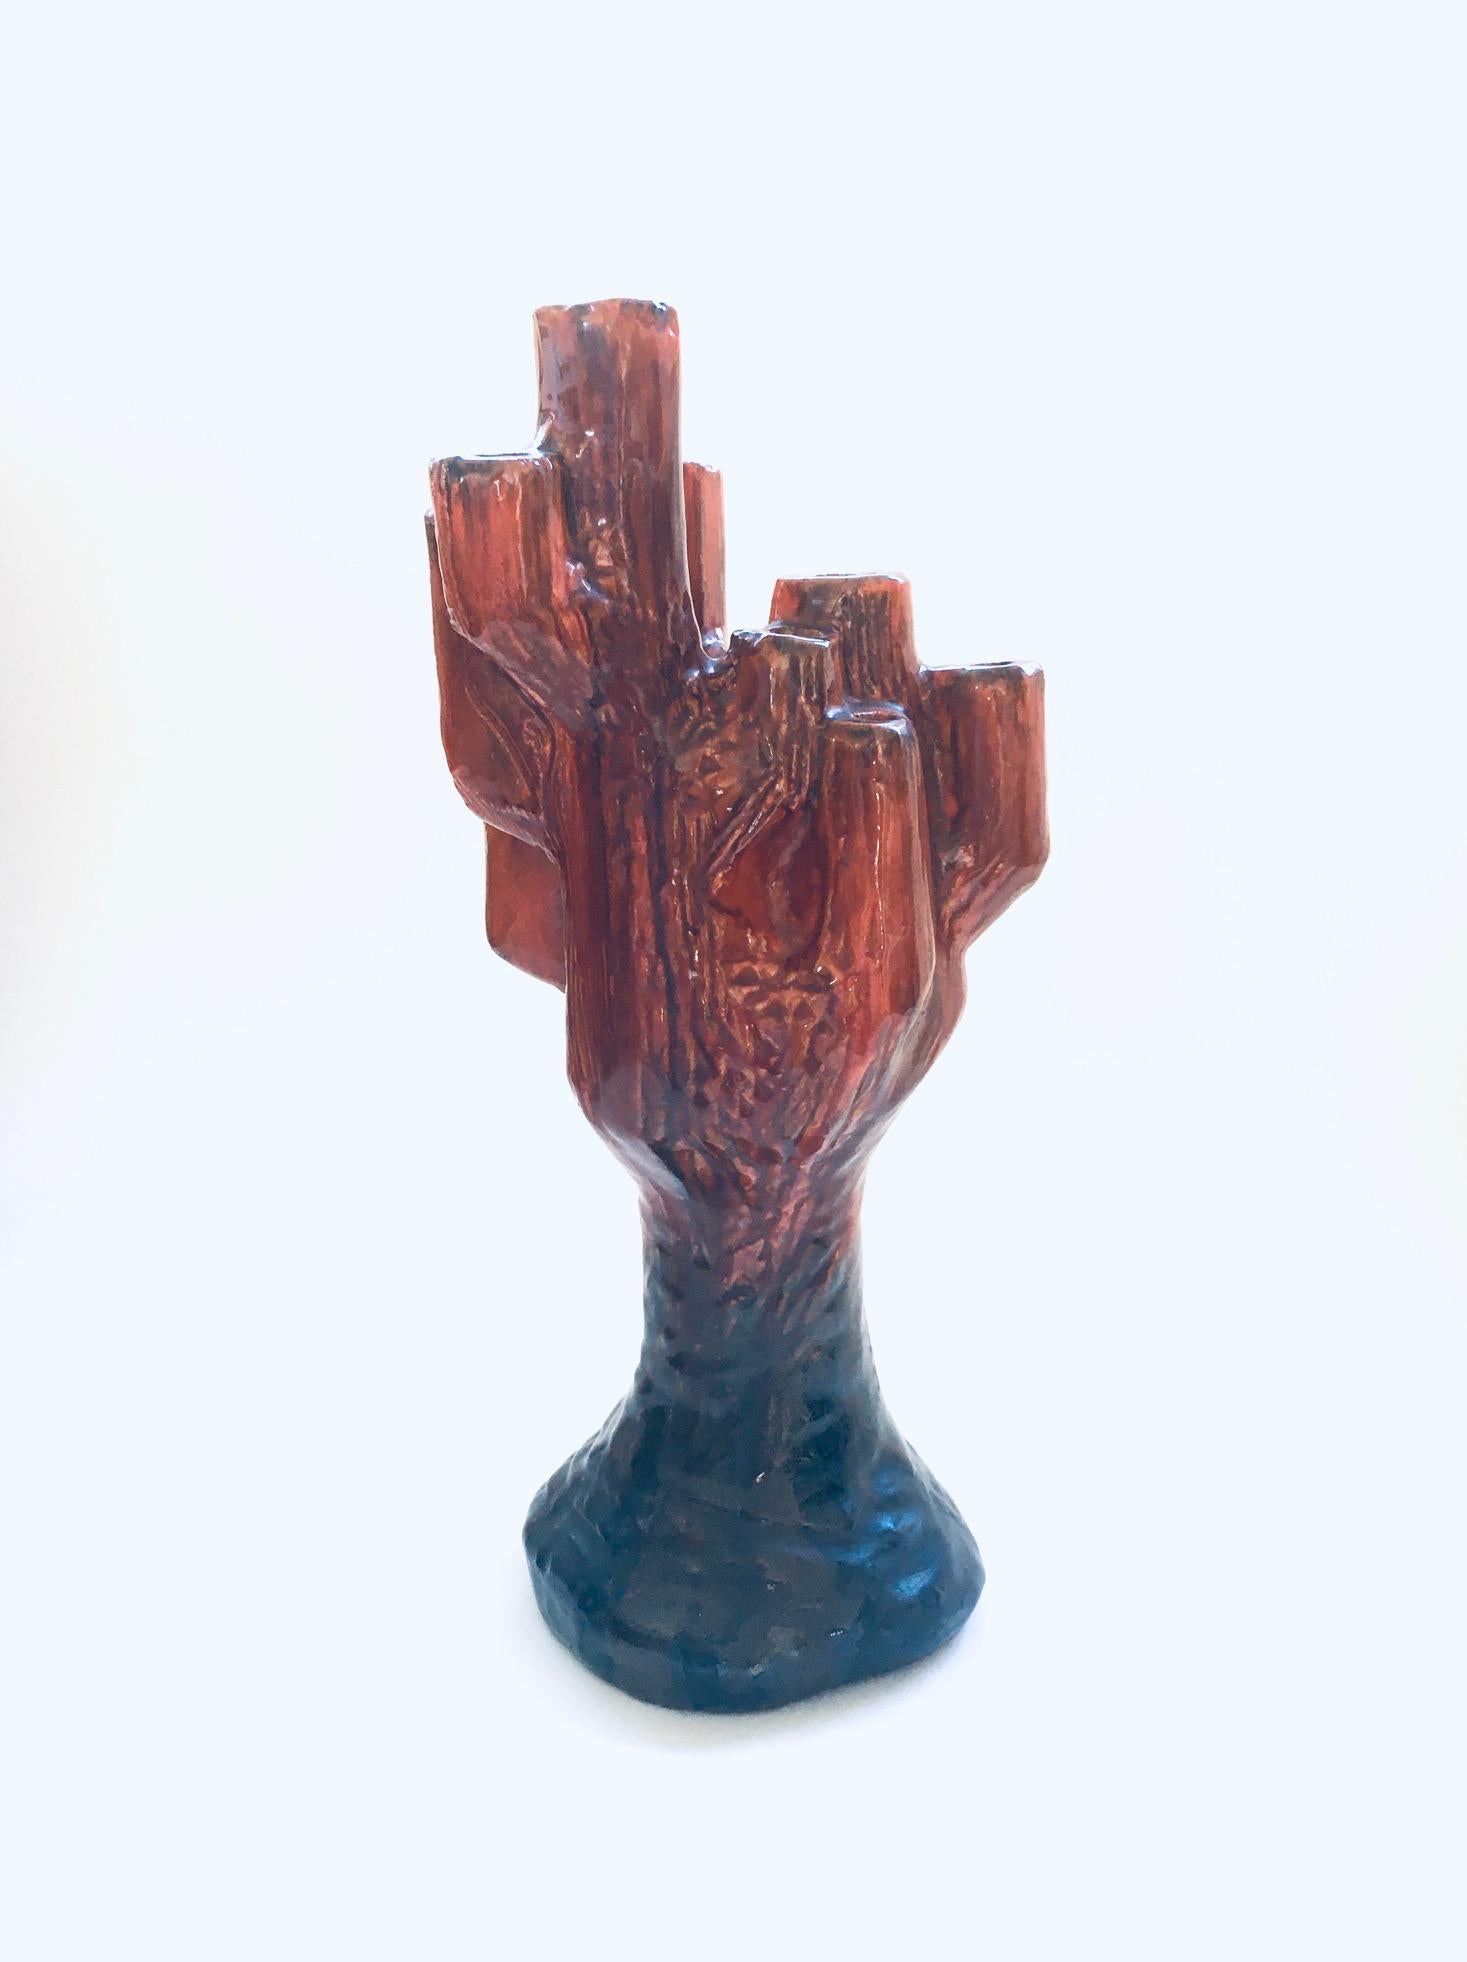 Mid-20th Century Studio Art Pottery Candle Holder Cactus Shaped Ceramic Object, signed F.B. 1960s For Sale